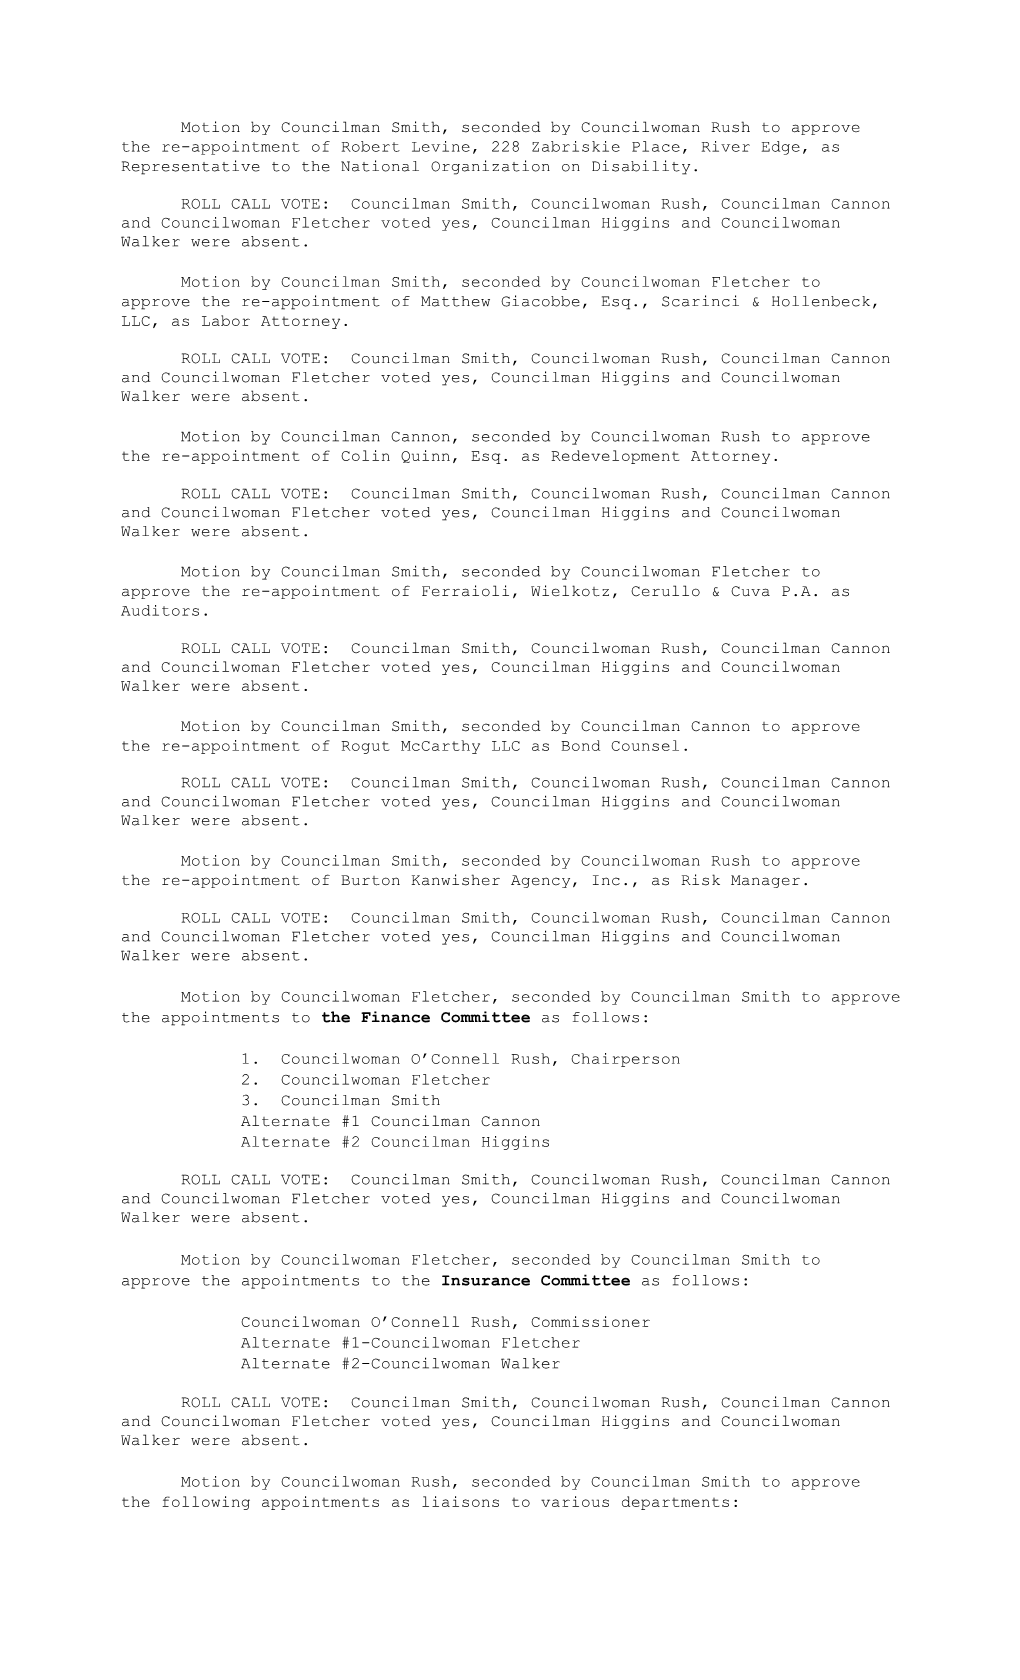 Reorganization Meeting of the Mayor and Council Sunday, January 2, 2000 (Following The